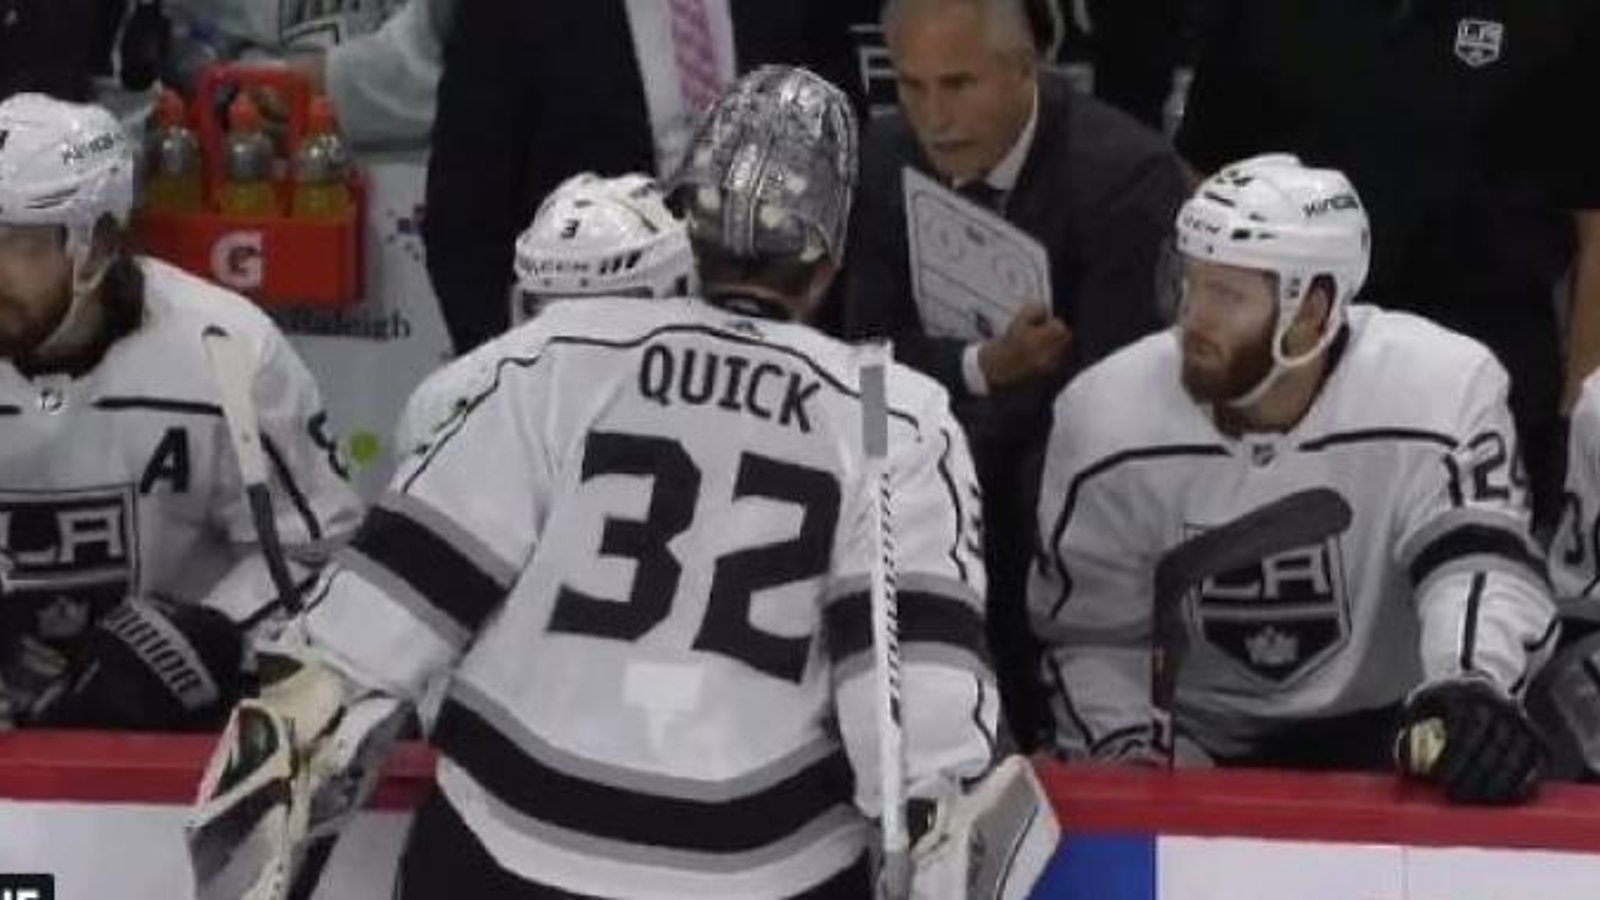 Kings coach humiliates Quick, pushes him to walk out on team?! 